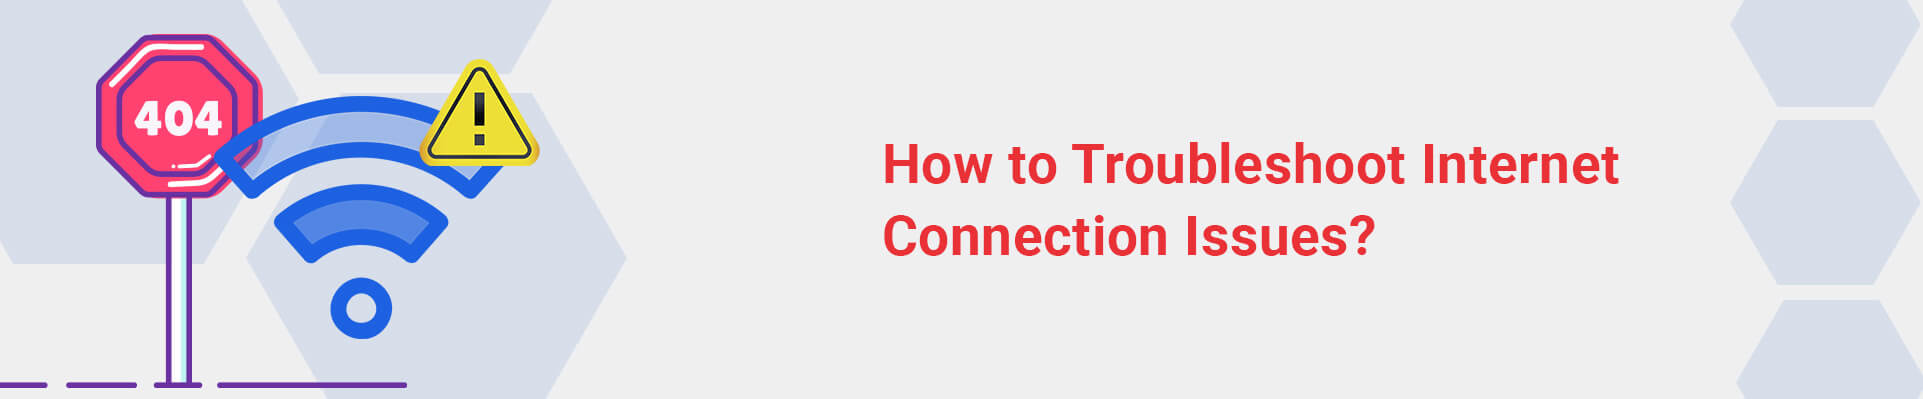 How to Troubleshoot Internet Connection Issues?